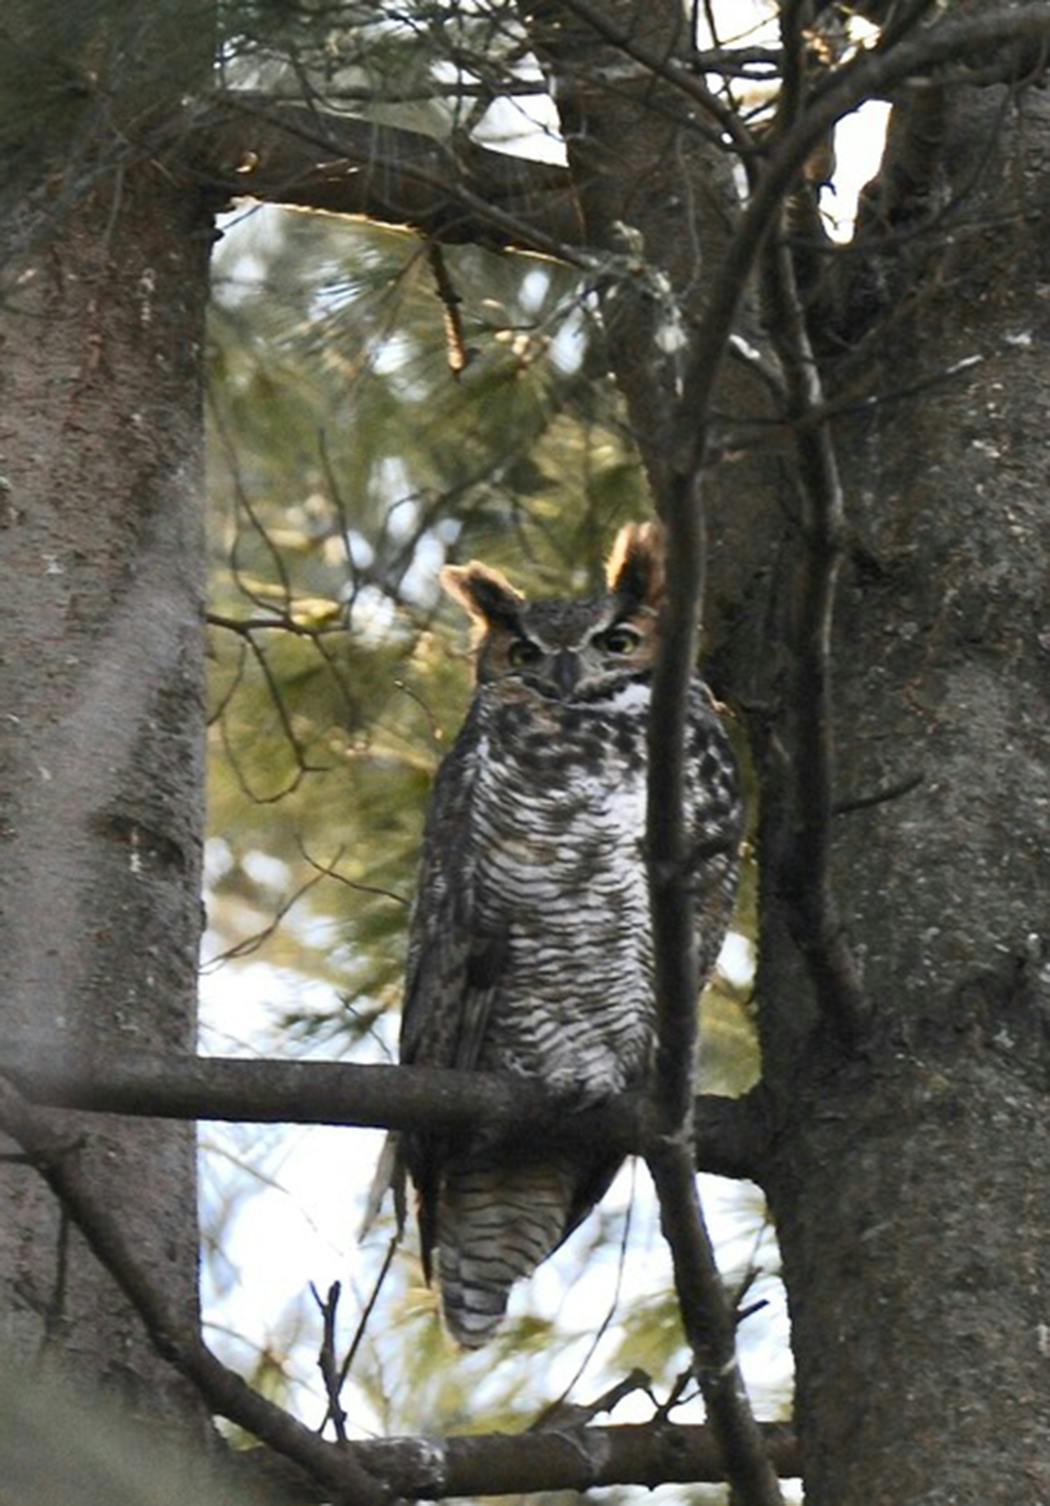 Great horned owls usually eat live prey.